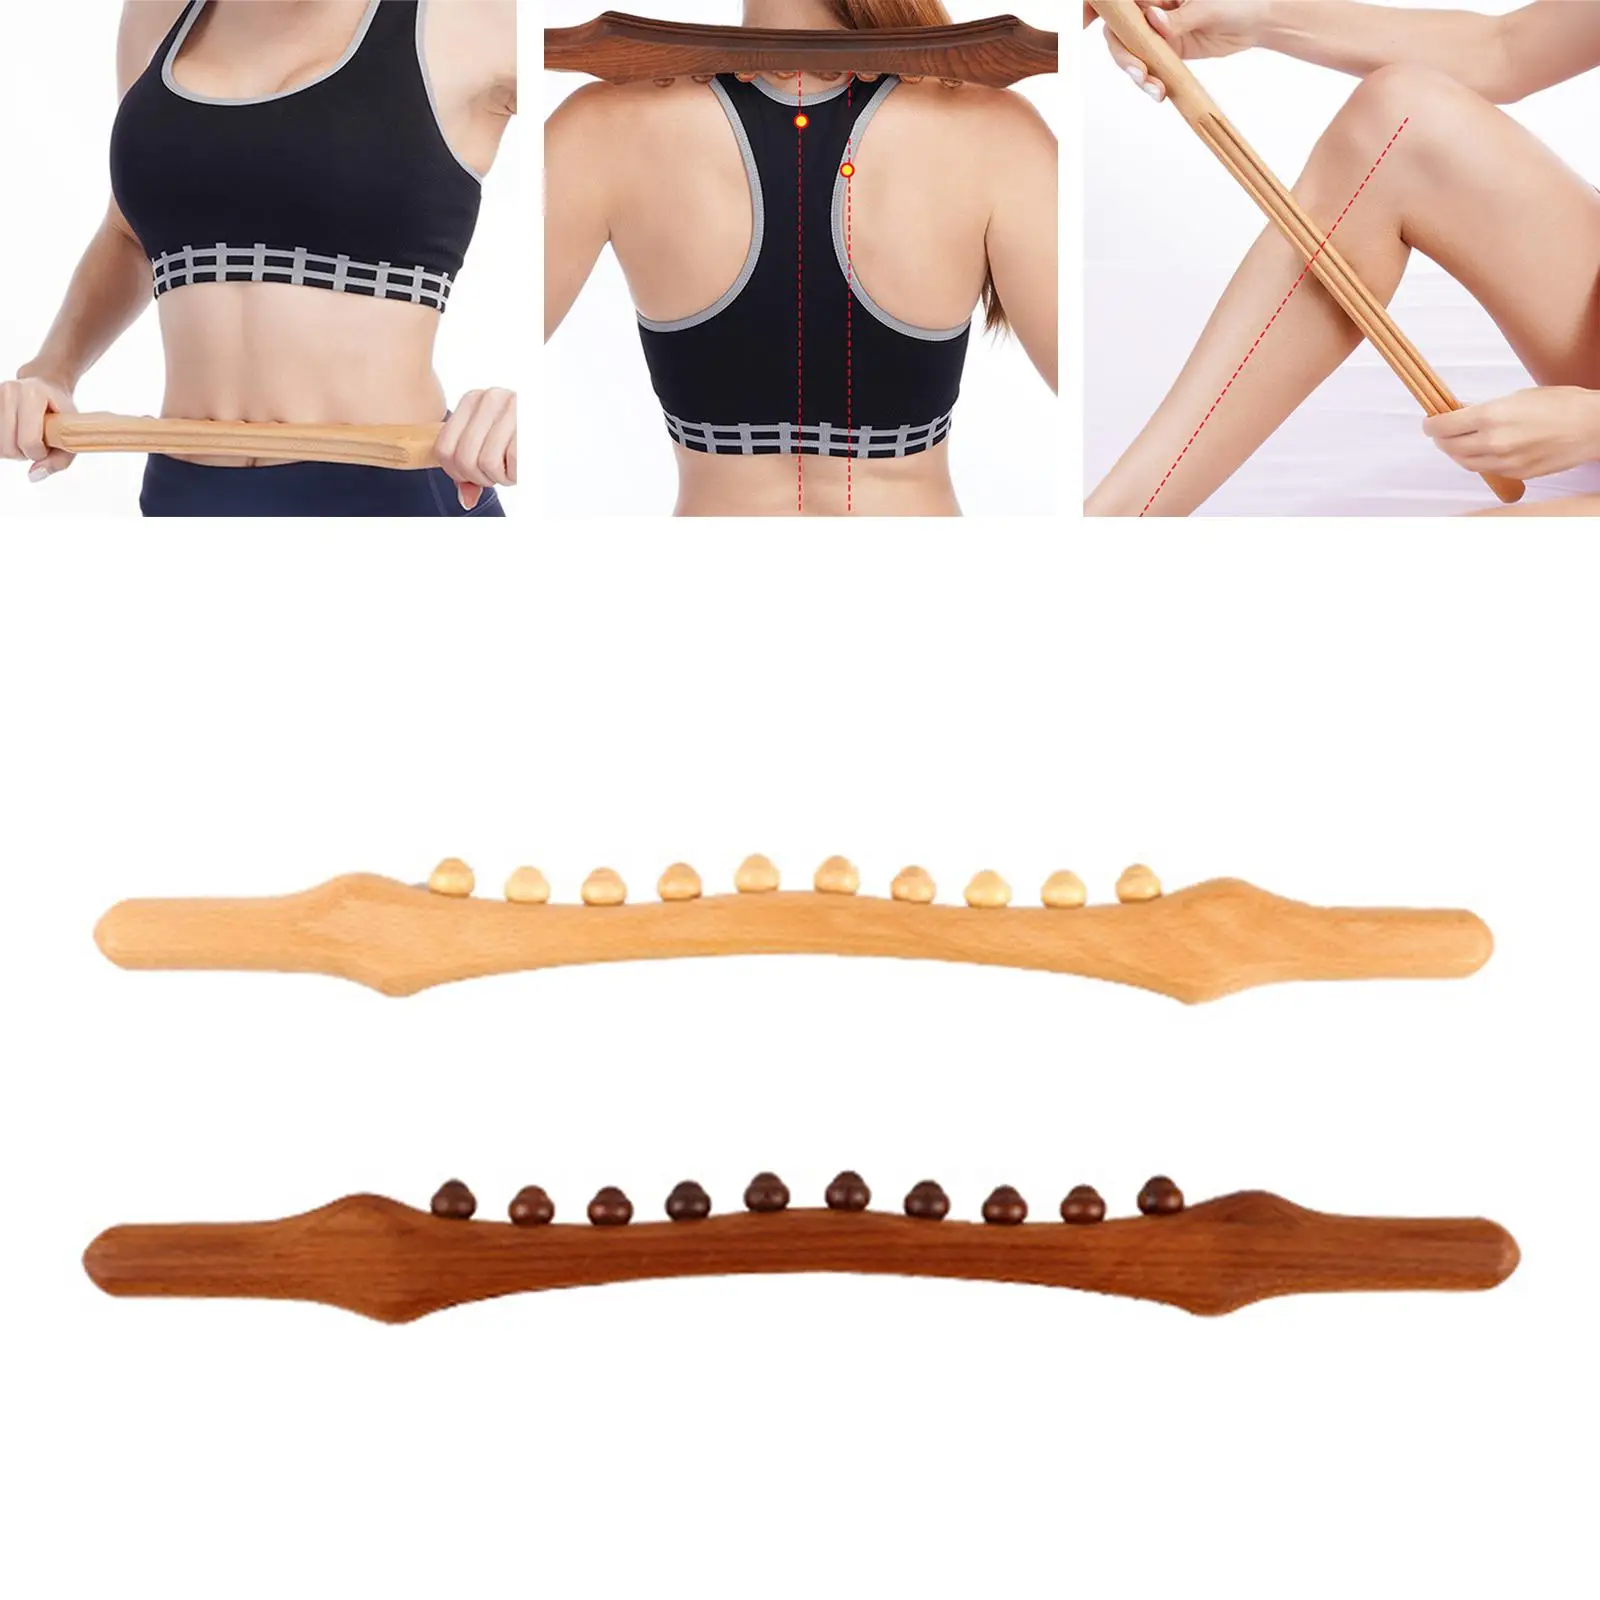 Wooden Guasha Scraping Stick Massage Tools 10 Beads Acupuncture Massager Body Shaping Muscle Relaxation Massager for Waist Back